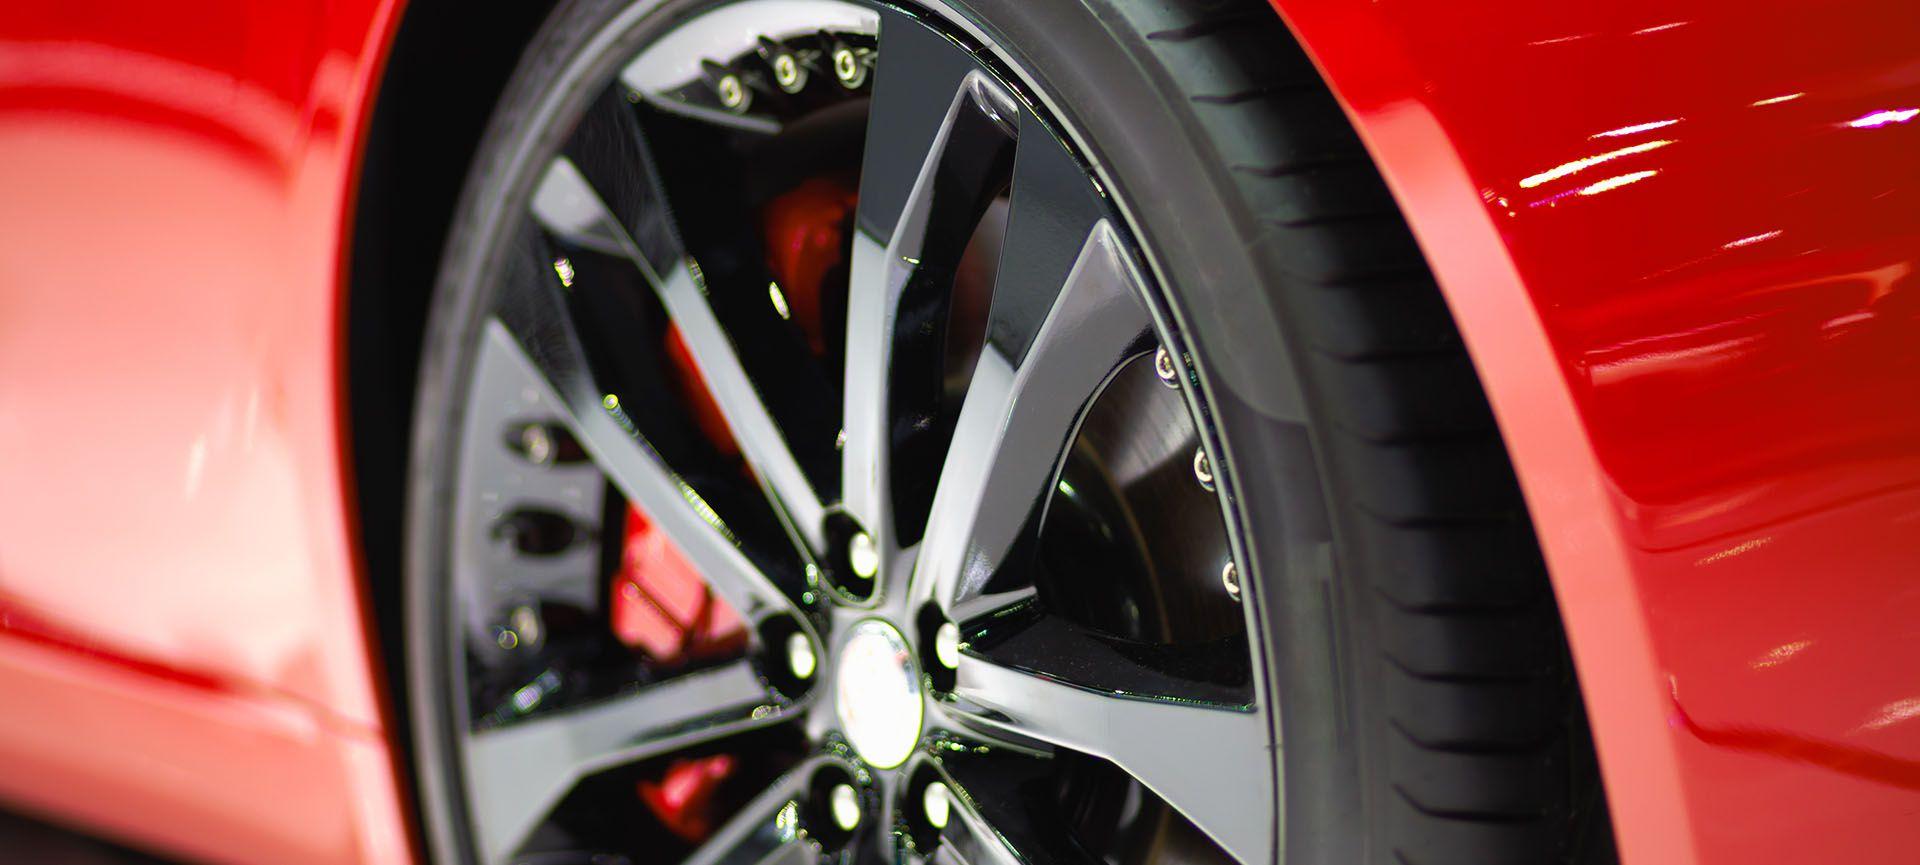 Different Types of Wheel Refinishing Processes